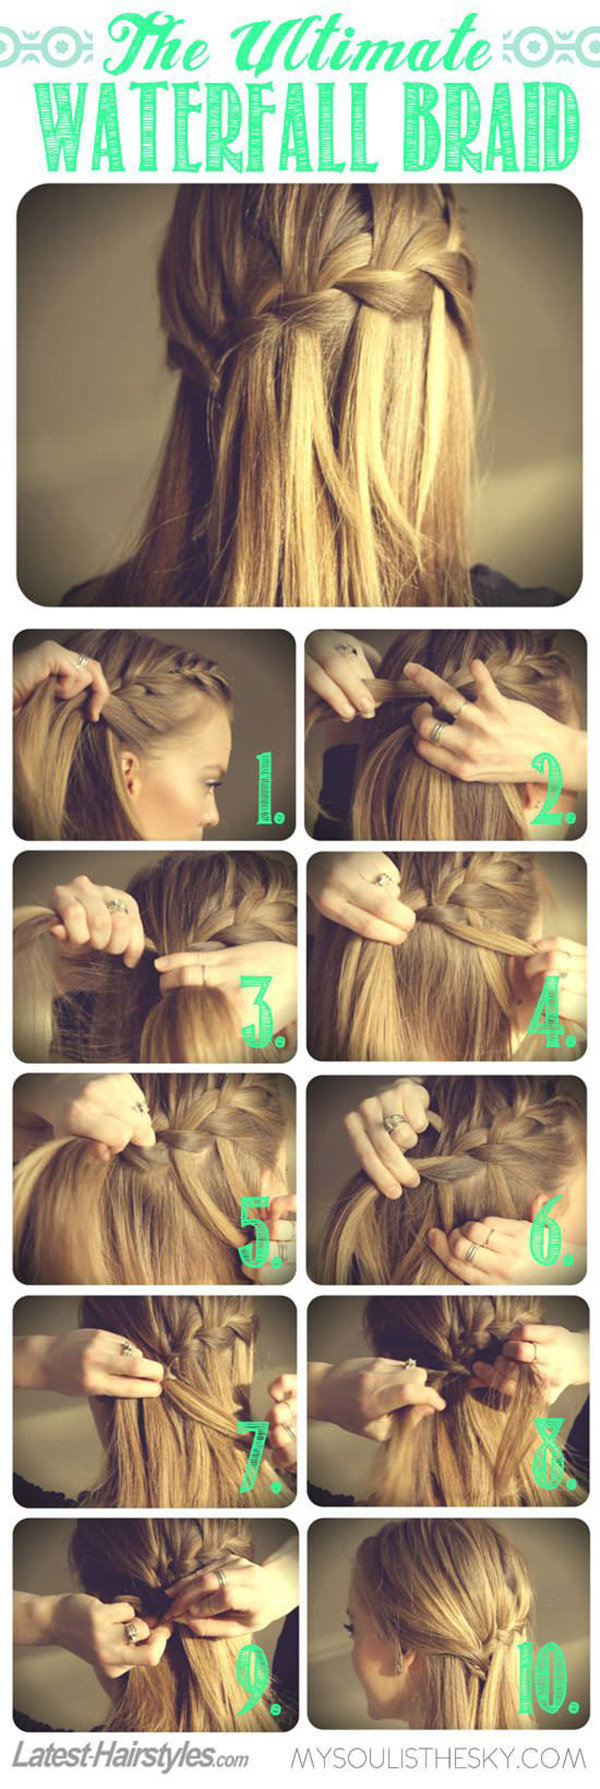 Five easy wedding hairstyles you can do yourself - Hair Romance